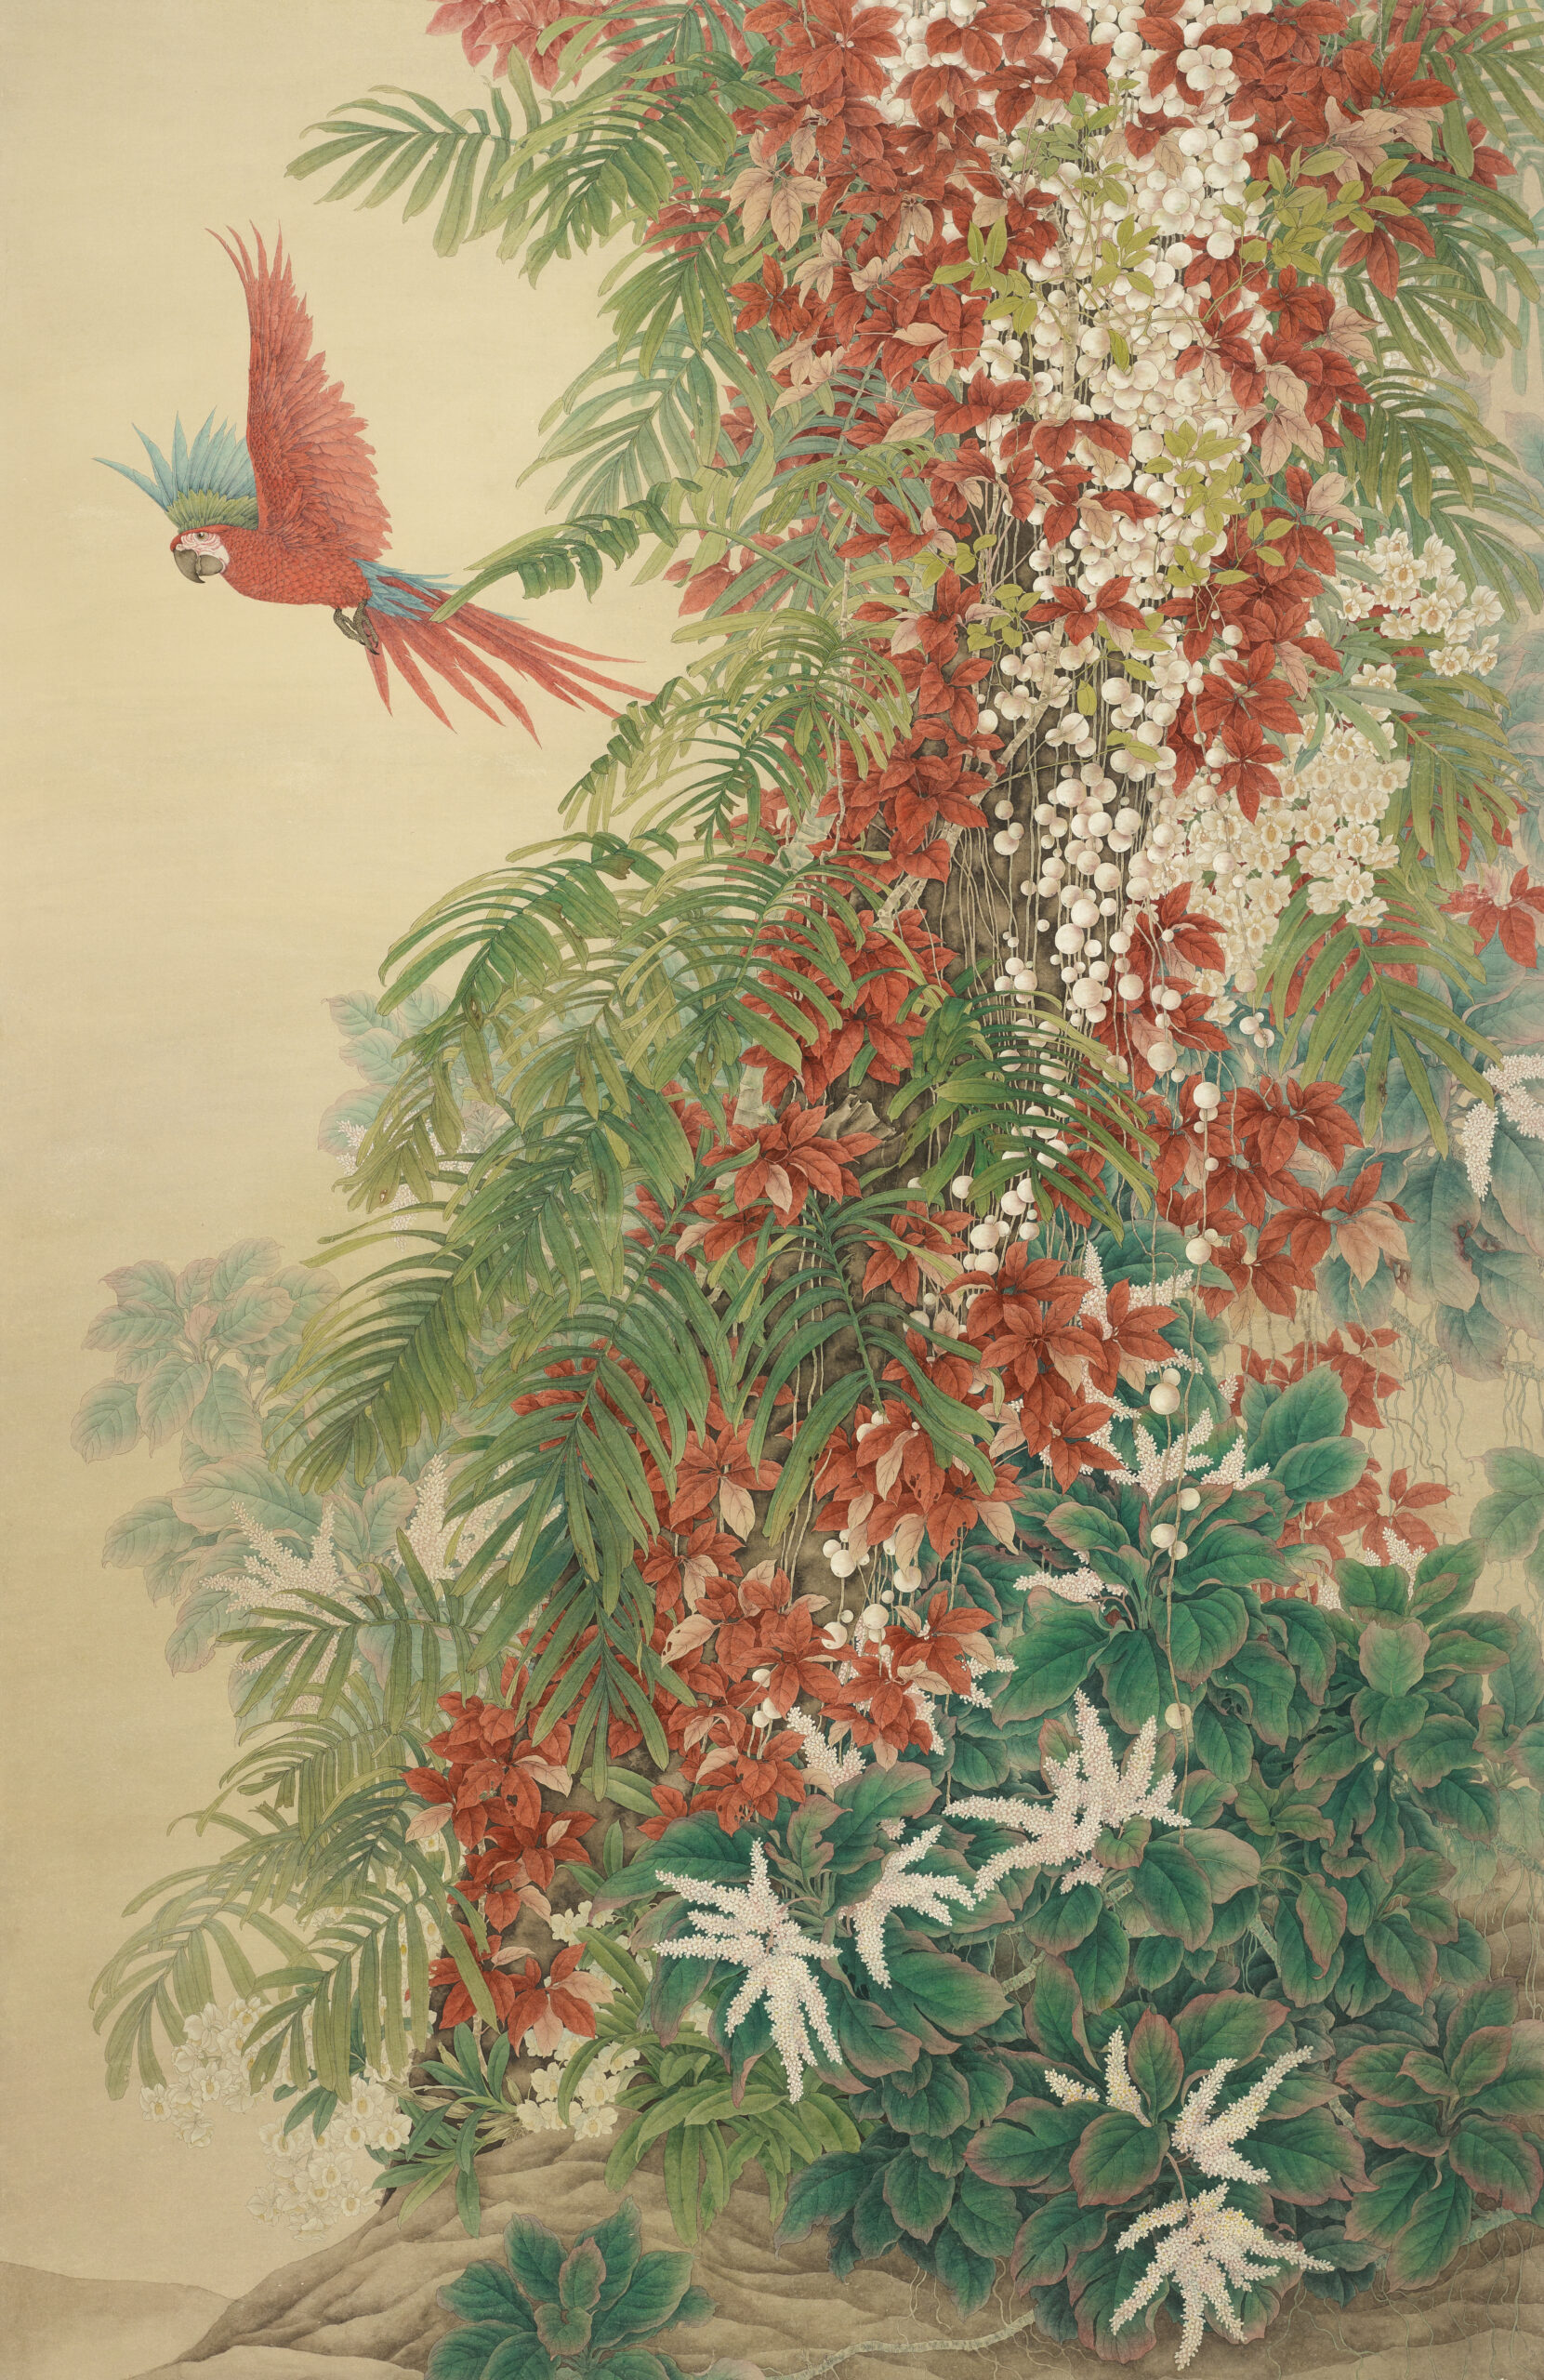 A traditional Chinese ink painting of a garden. Most of the composition is taken up with leaves and red, orange and white blossoms cascading down the page. In the top left corner a red and blue parrot takes flight from the overgrowth.